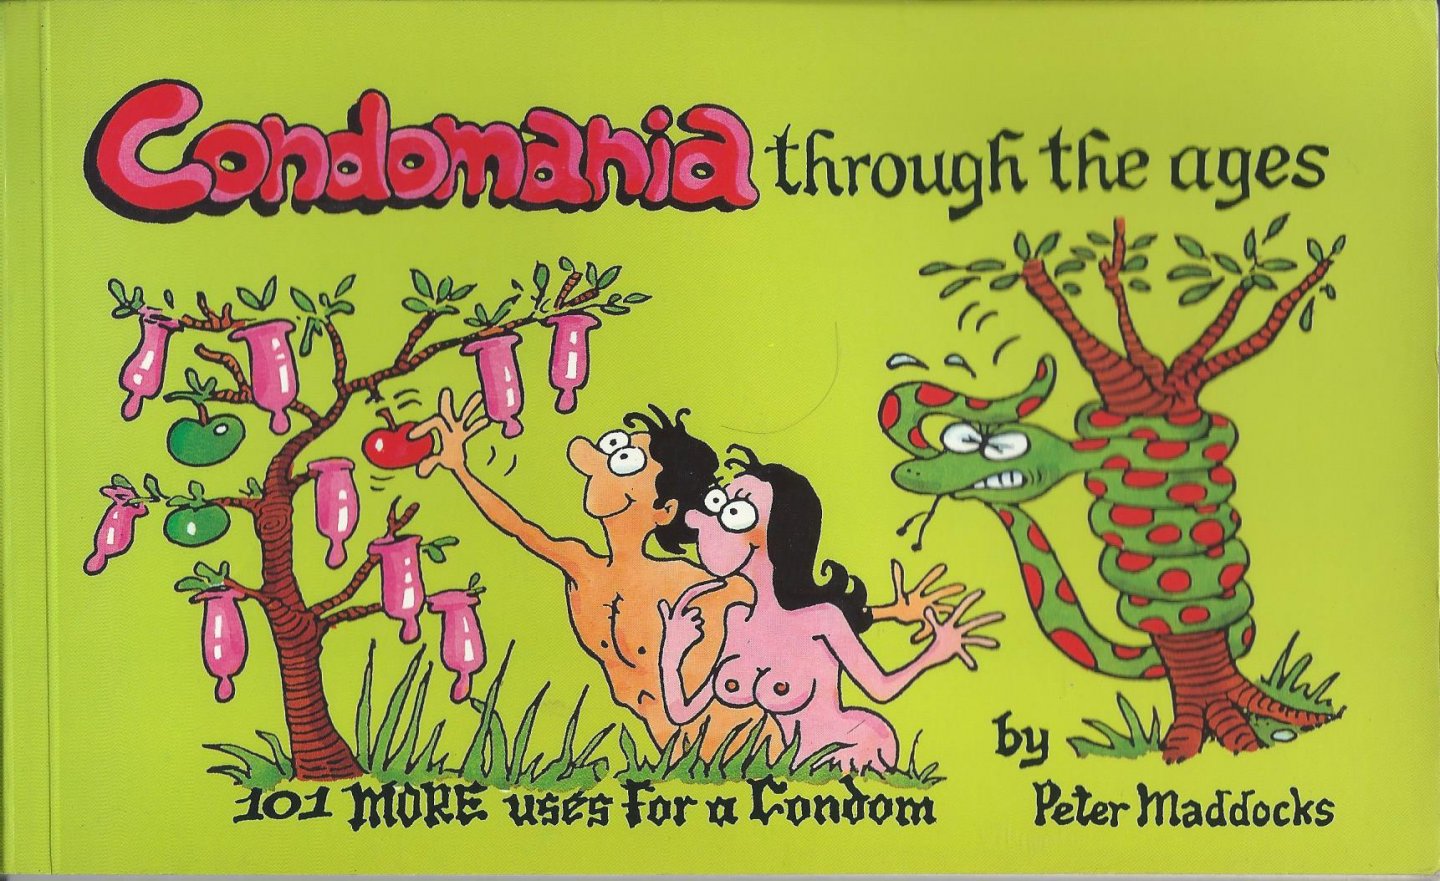 Maddocks, Peter - Condomania through the ages - 101 more uses for a condom